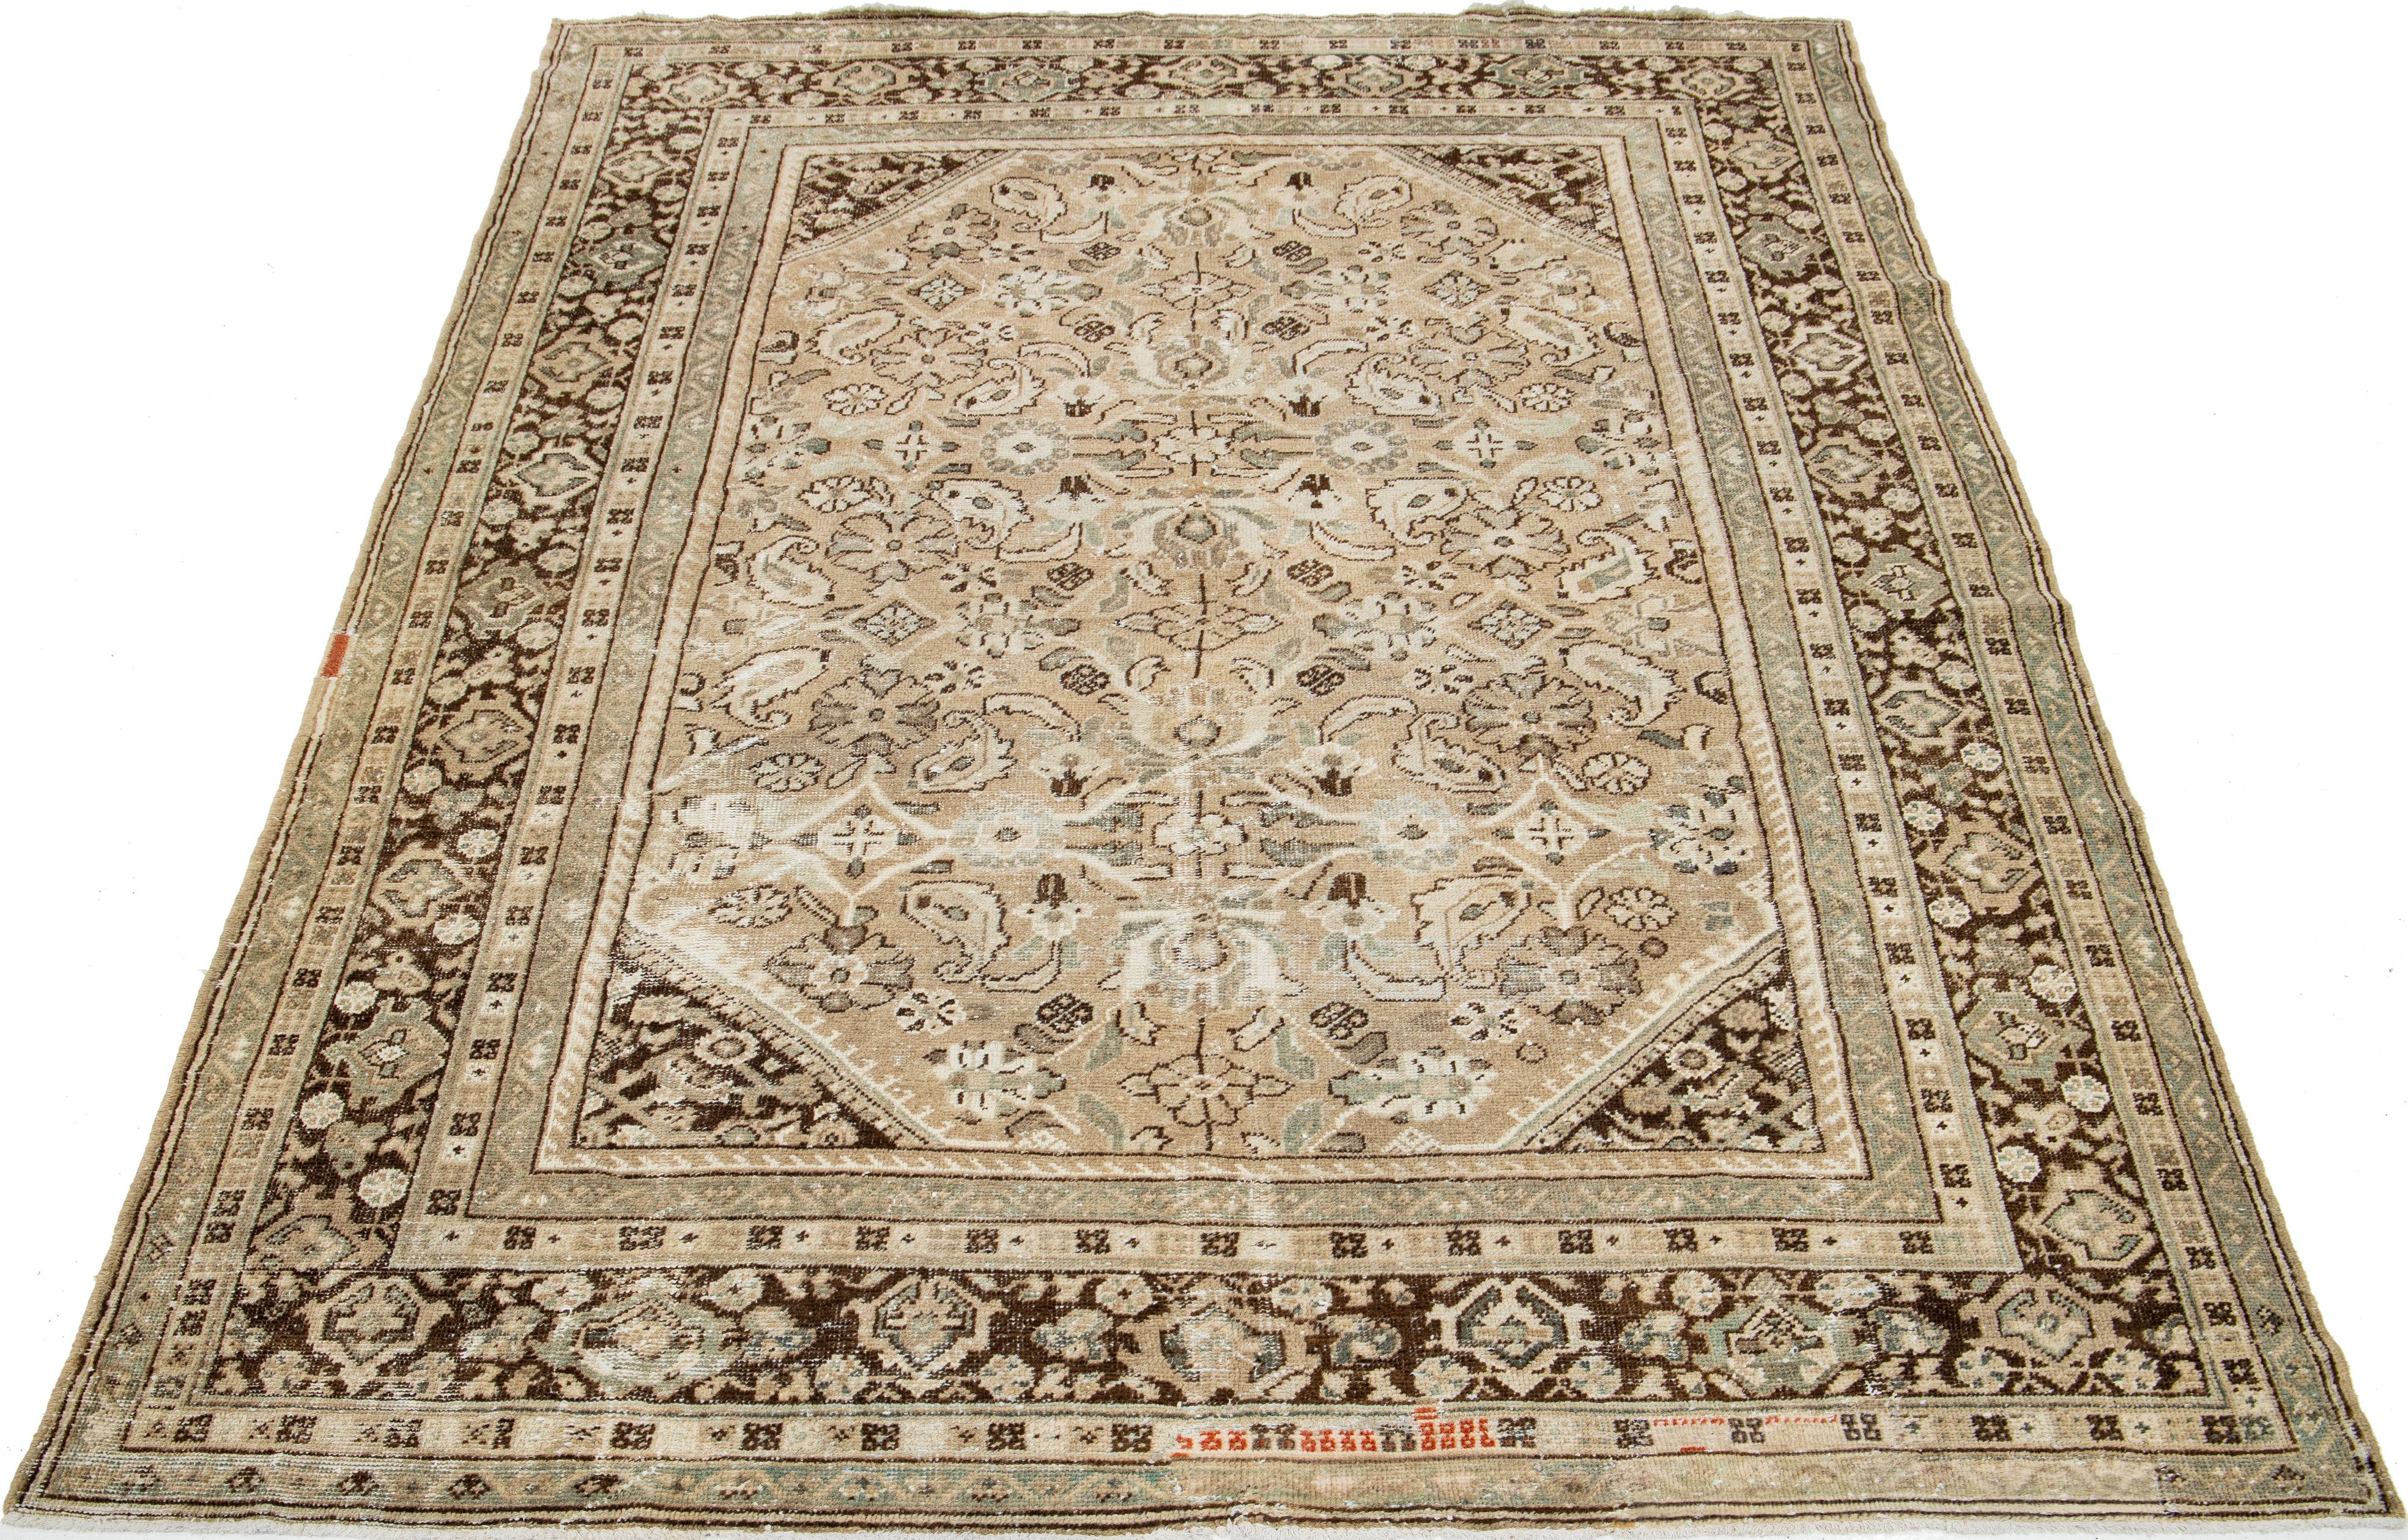 This Vintage Persian Mahal wool rug has a beige background and blue, rust, and brown floral designs.

This rug measures 7'5